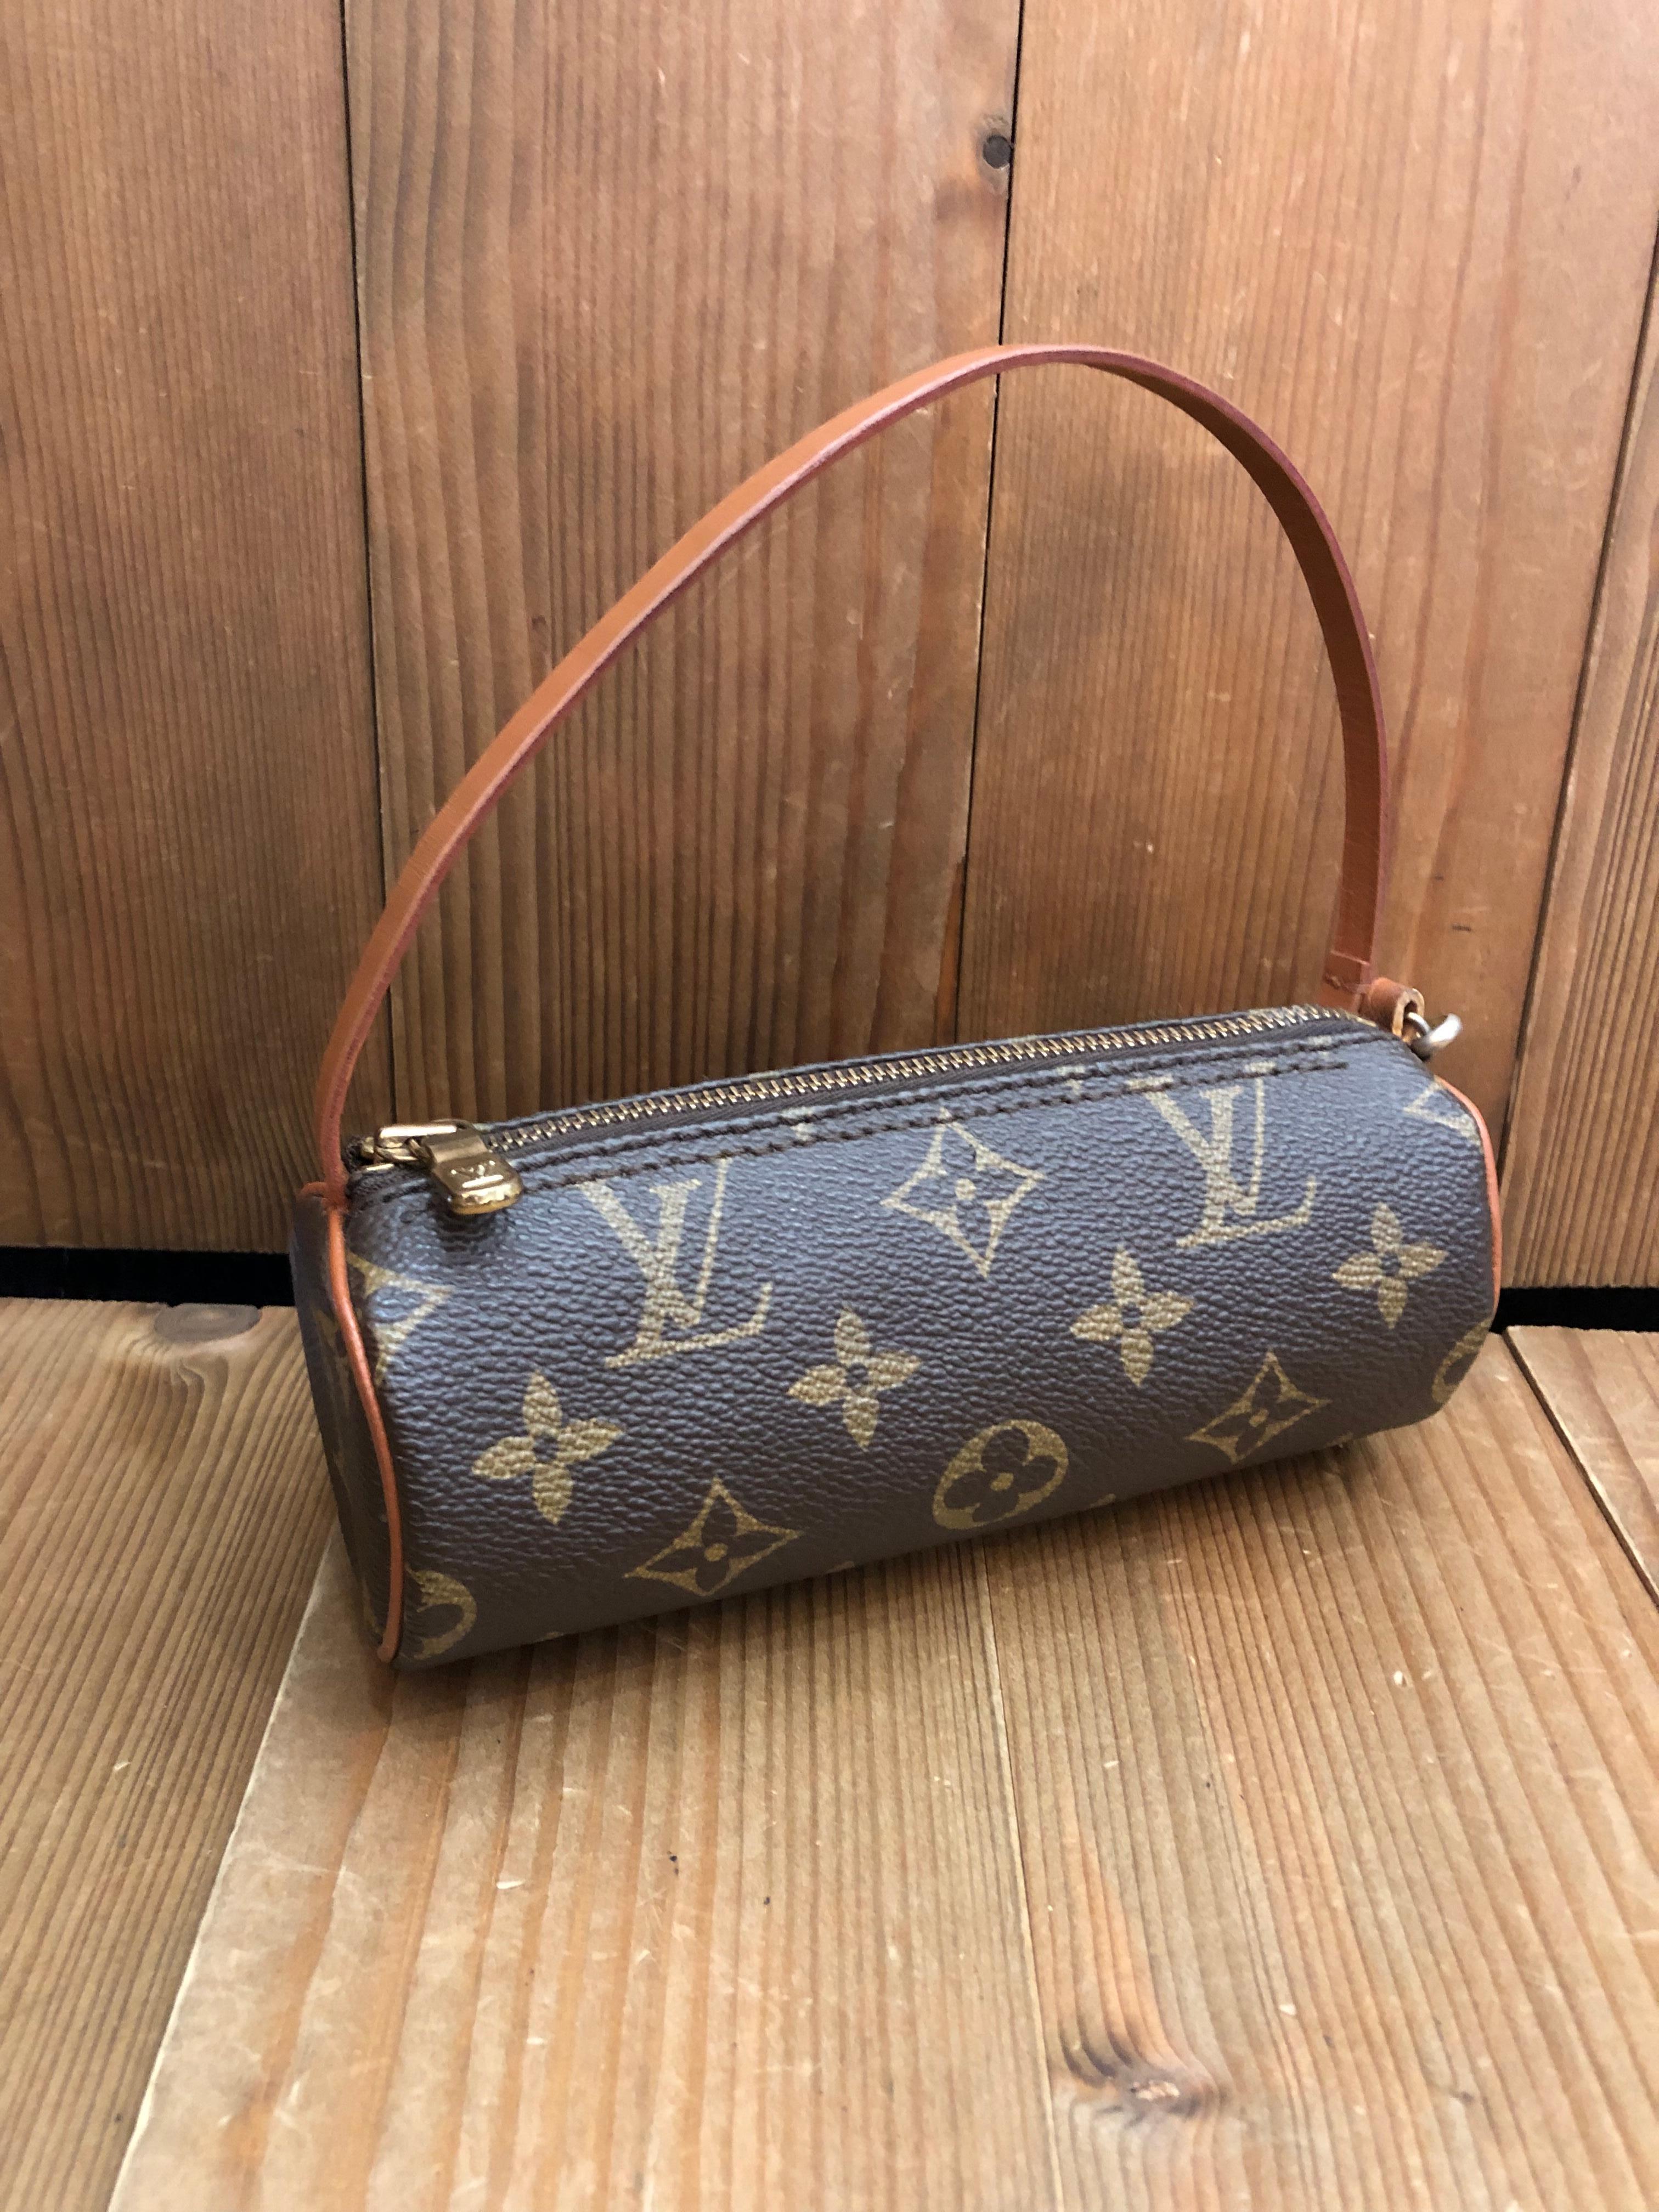 Vintage LOUIS VUITTON mini Papillon pouch in brown monogram canvas and leather. Measures 6.25”x 2.25”x 2.25”. Comes with complimentary non-Lv chain. 

Condition - Generally in good vintage condition with some signs of wear. Note: Leather strap and